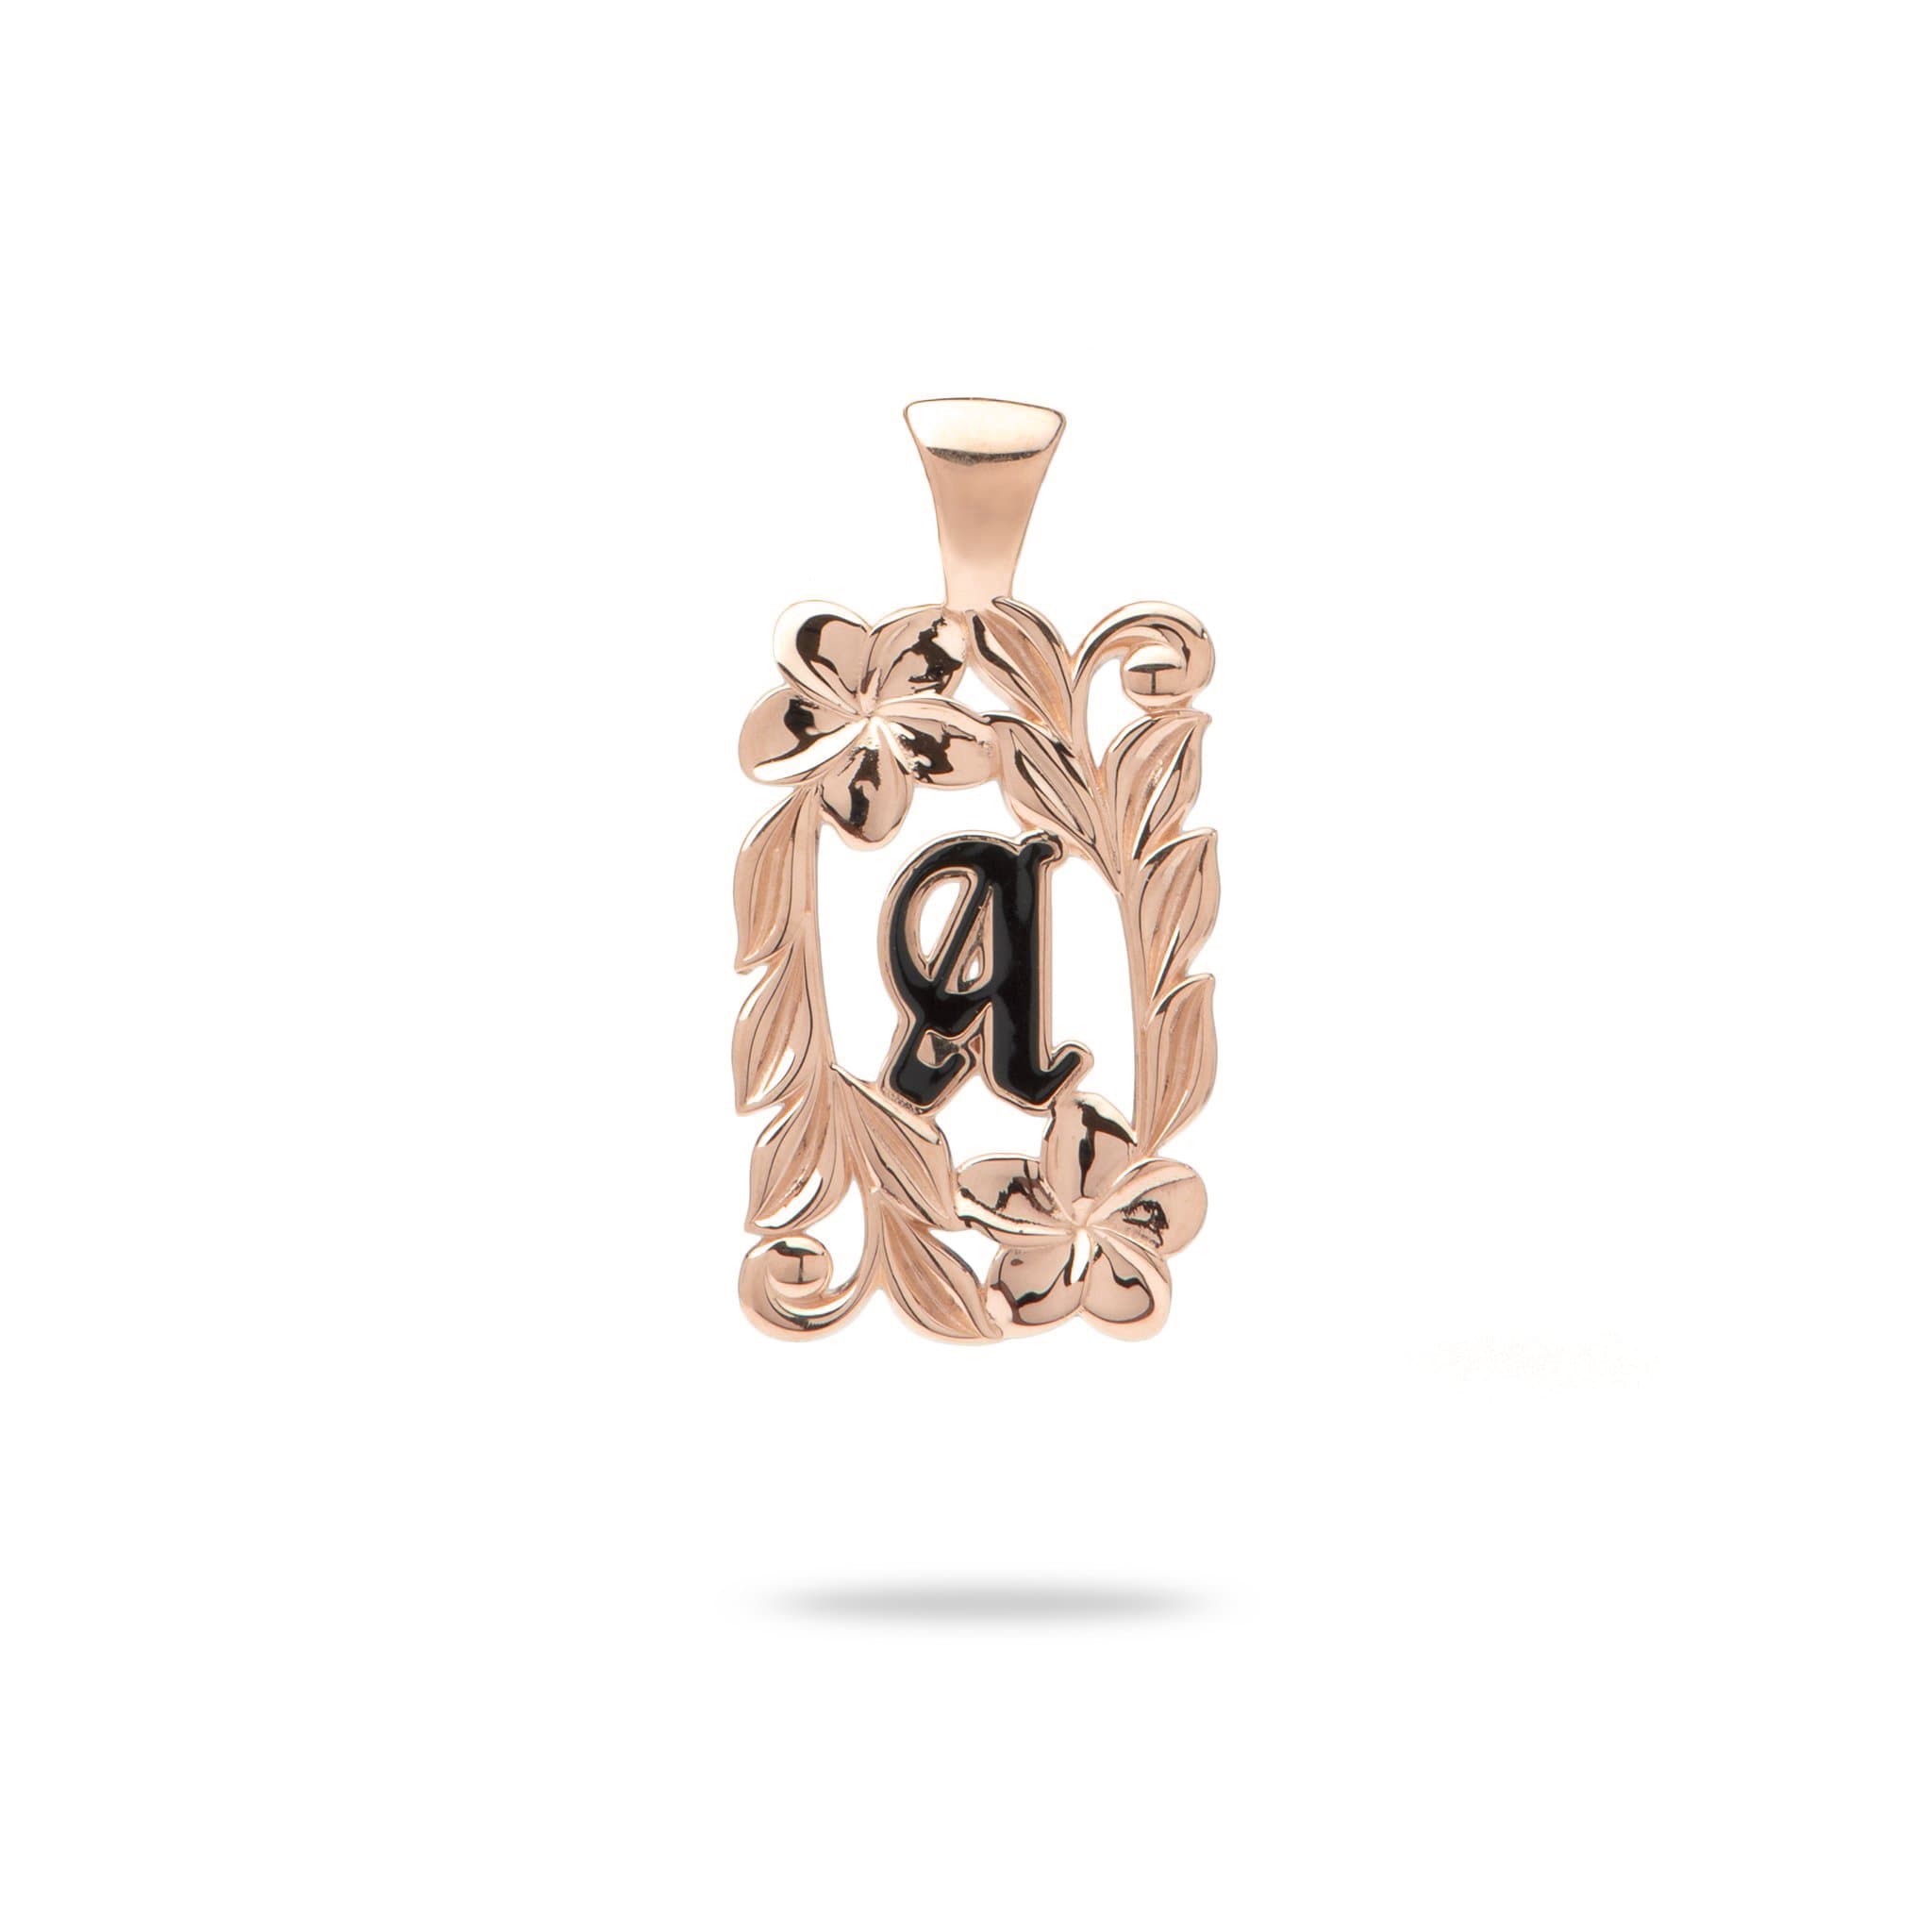 Special Order Hawaiian Heirloom Initial Pendant in Rose Gold - 014-03615-A-14R